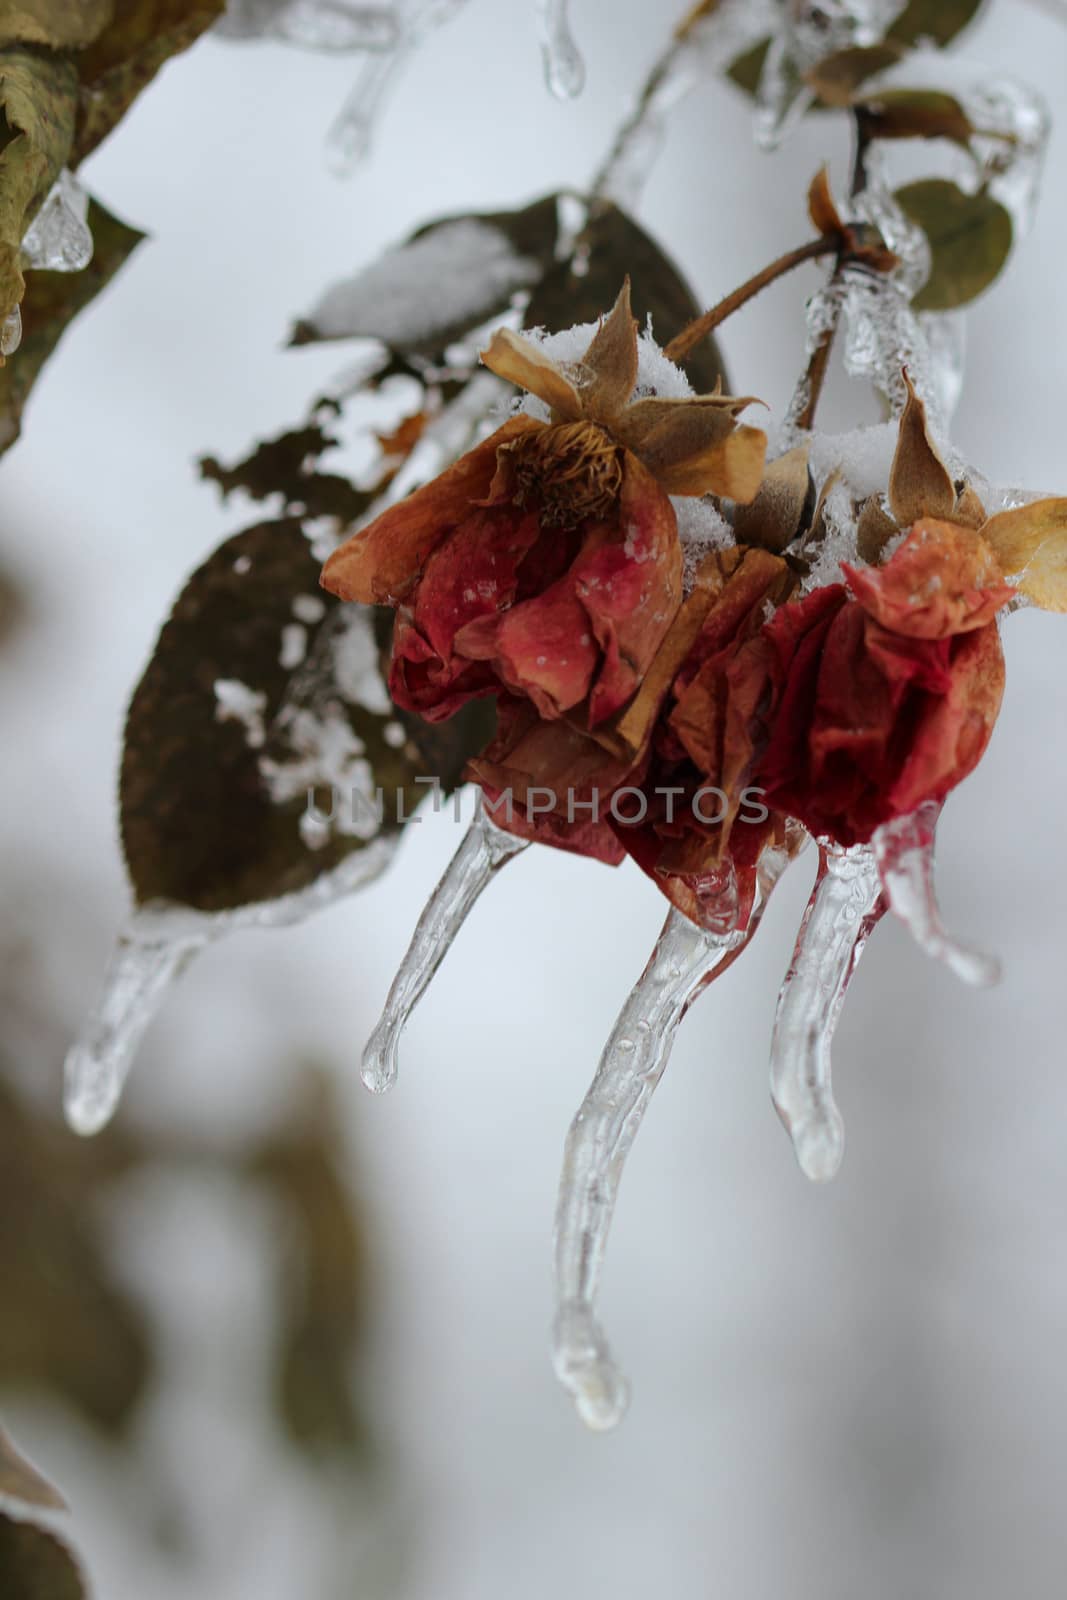 Layers of ice cover dried roses hanging from a rose bush after an ice storm in Michigan.